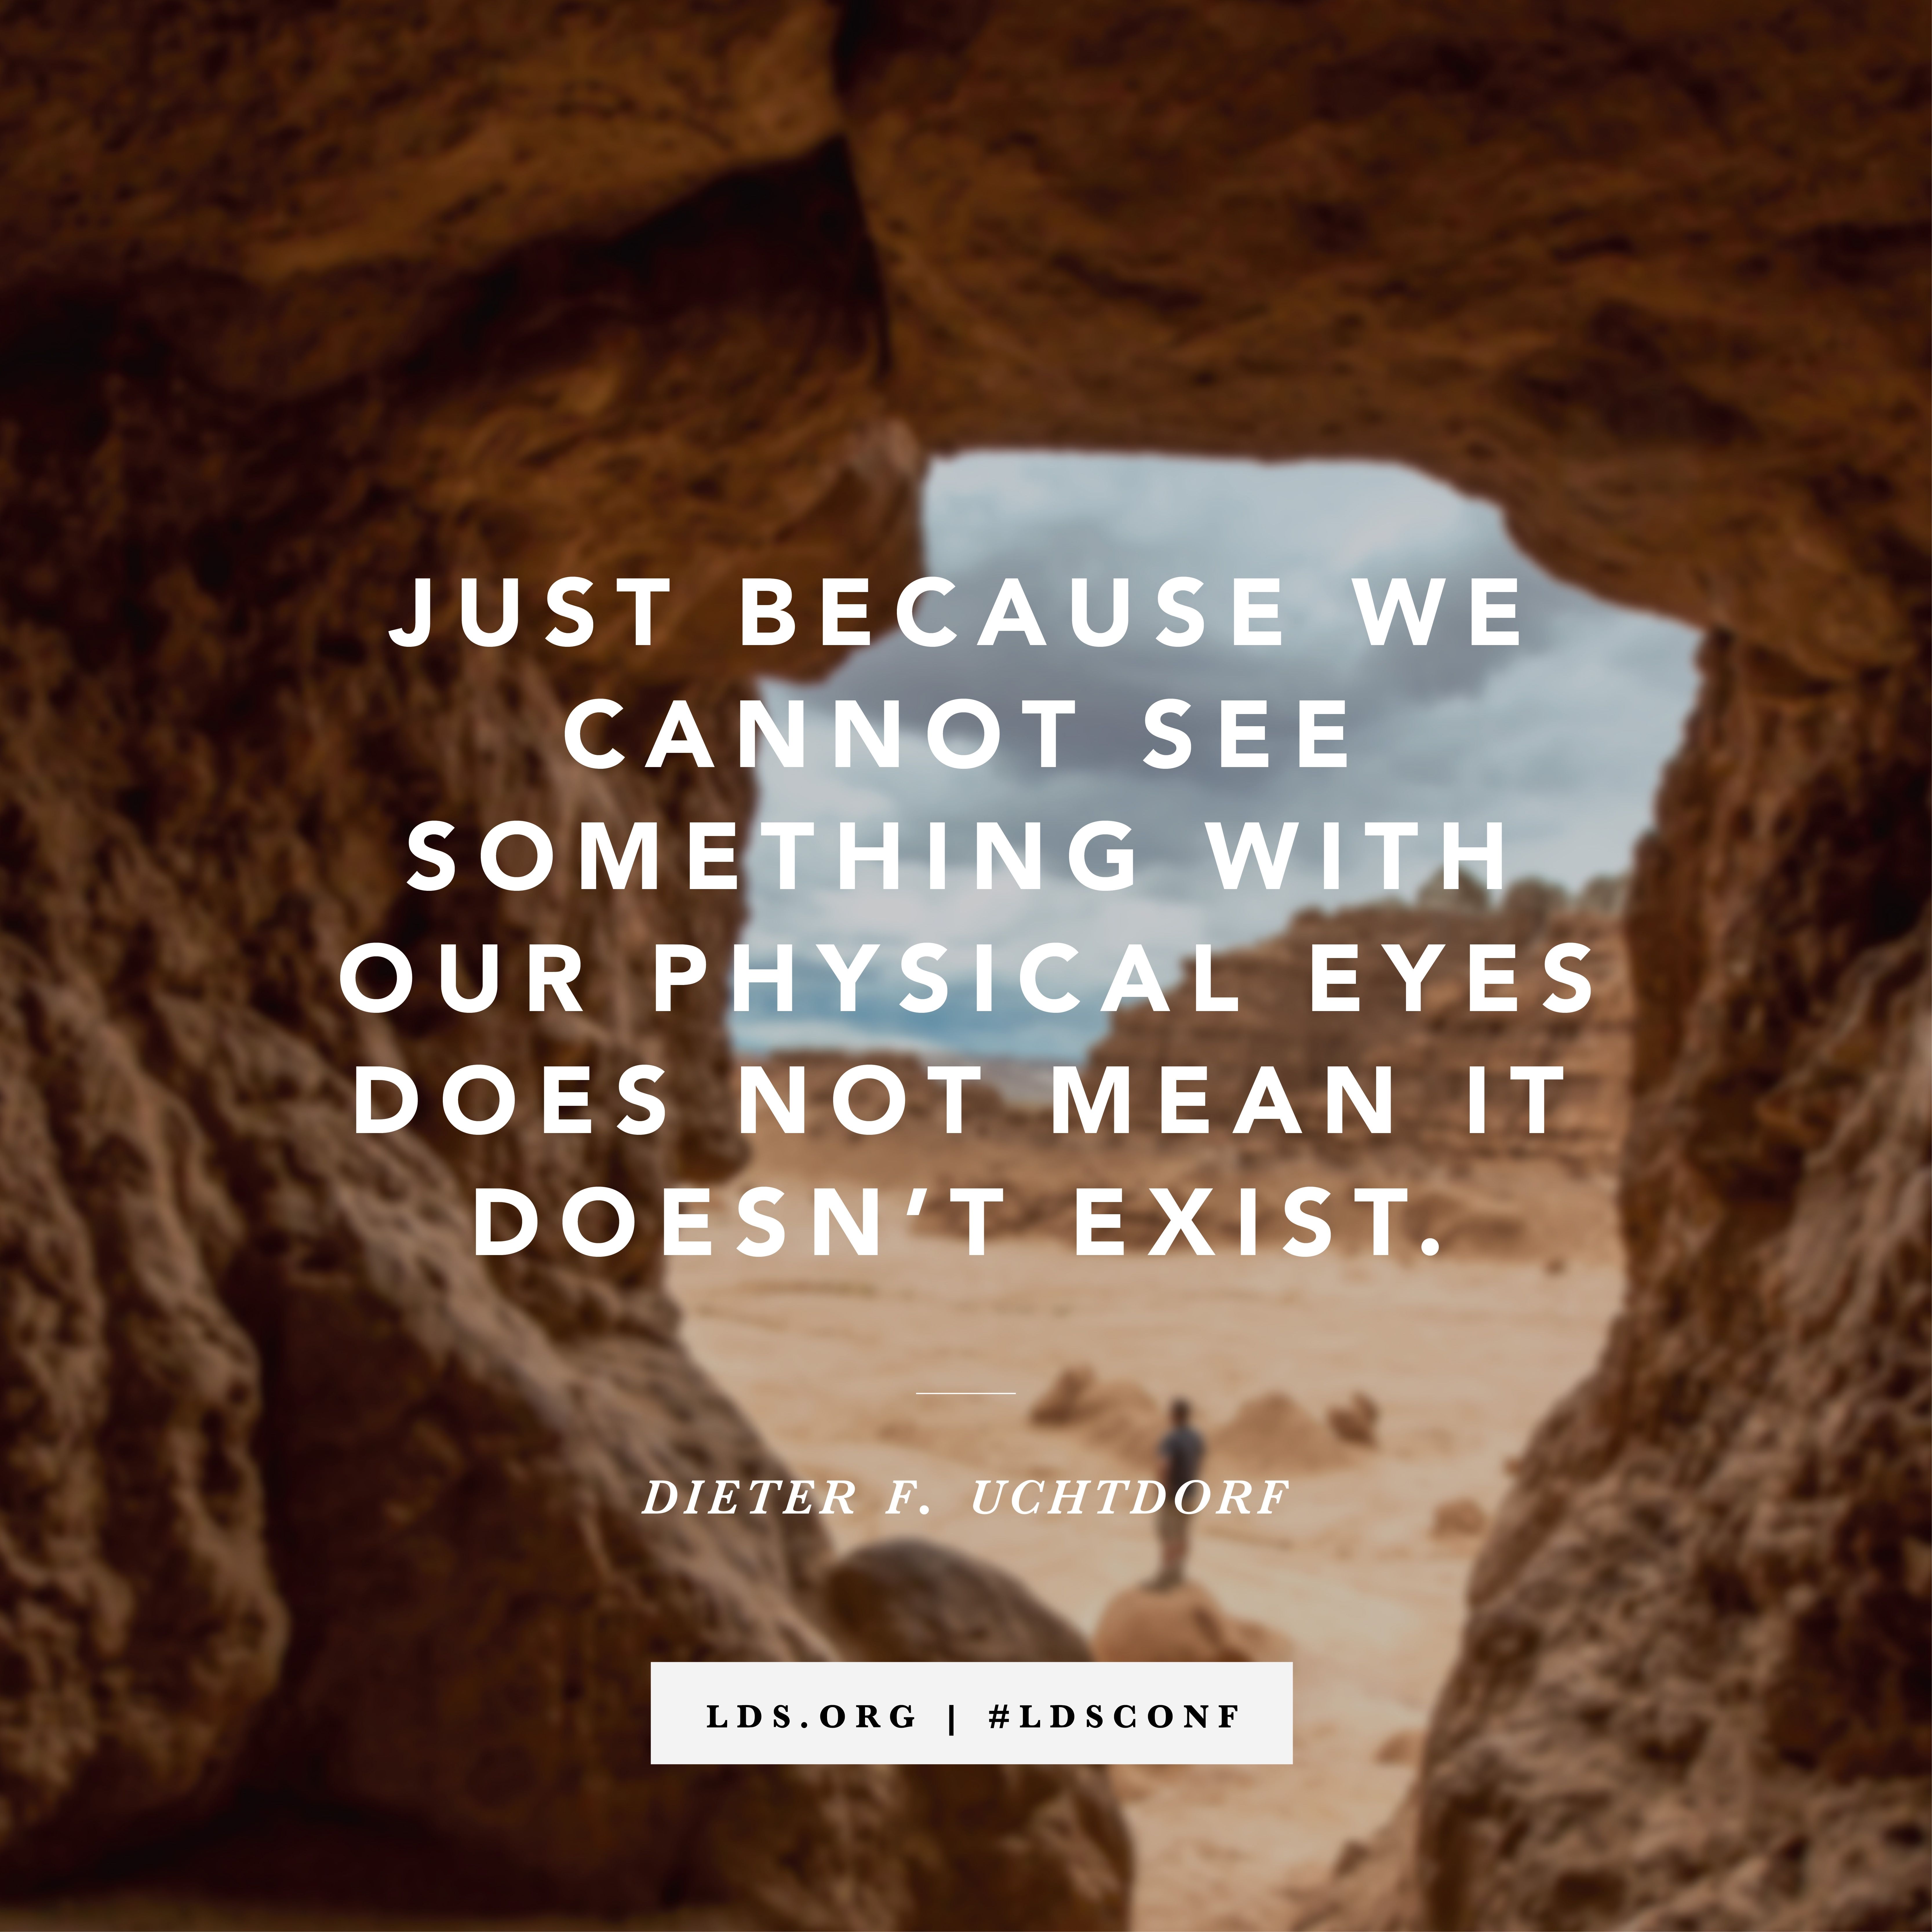 Our Physical Eyes